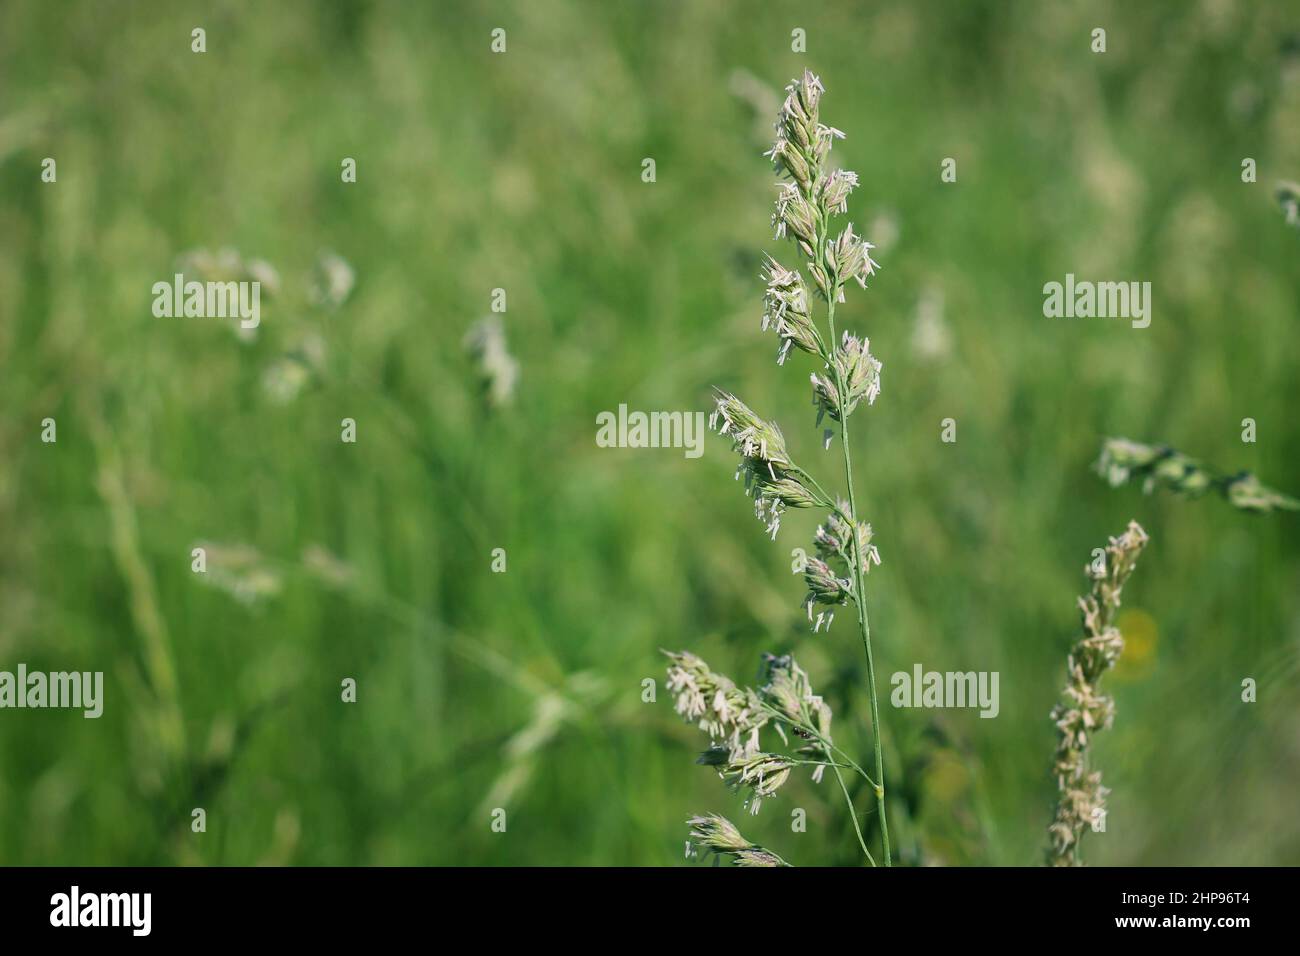 Close-up of wild grass, Poa annua, blooming on a rural background. Stock Photo